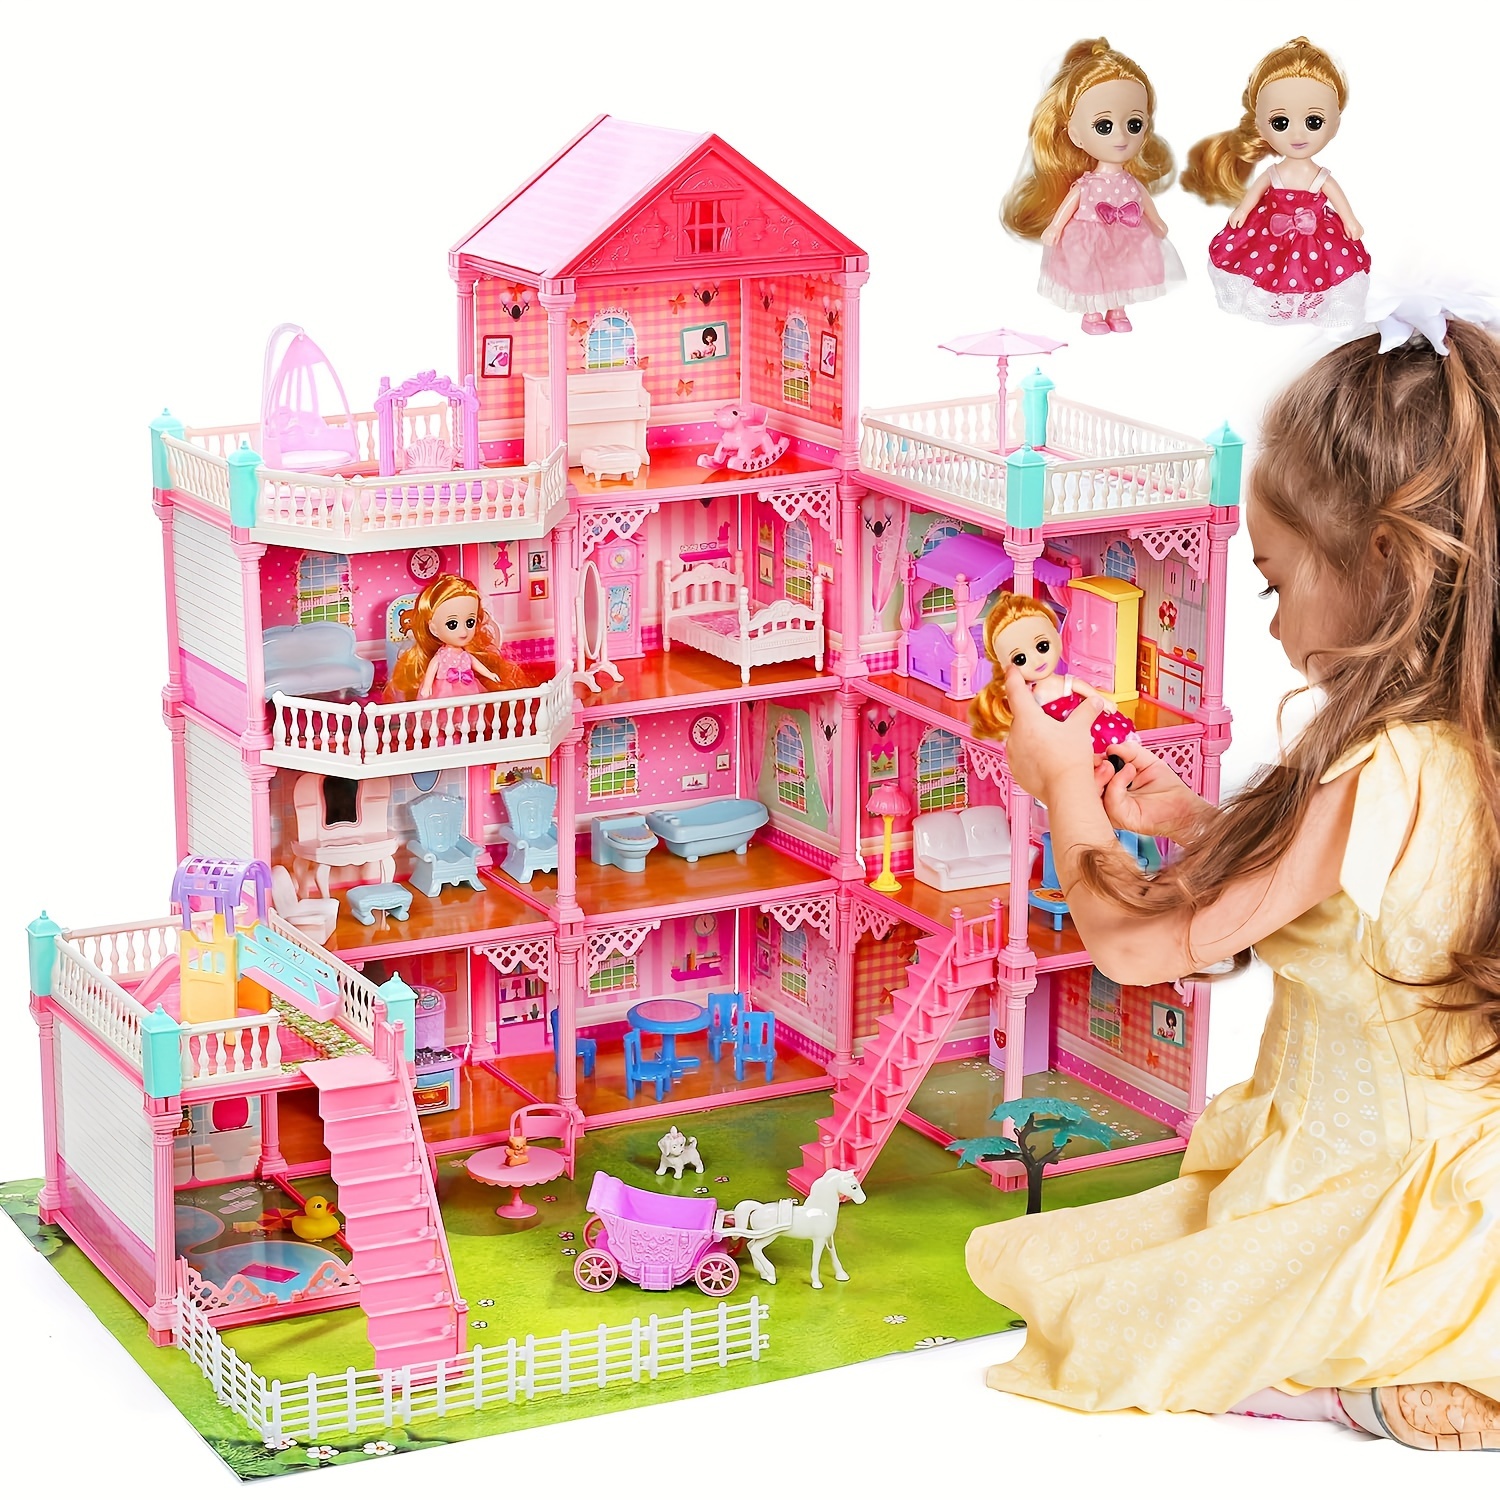 

11 Rooms Dollhouse For Girls, Huge Doll House Dollhouse With Light, Playhouse With 2 Dolls Toy Figures, Gift Toy For Kids Ages 3-8